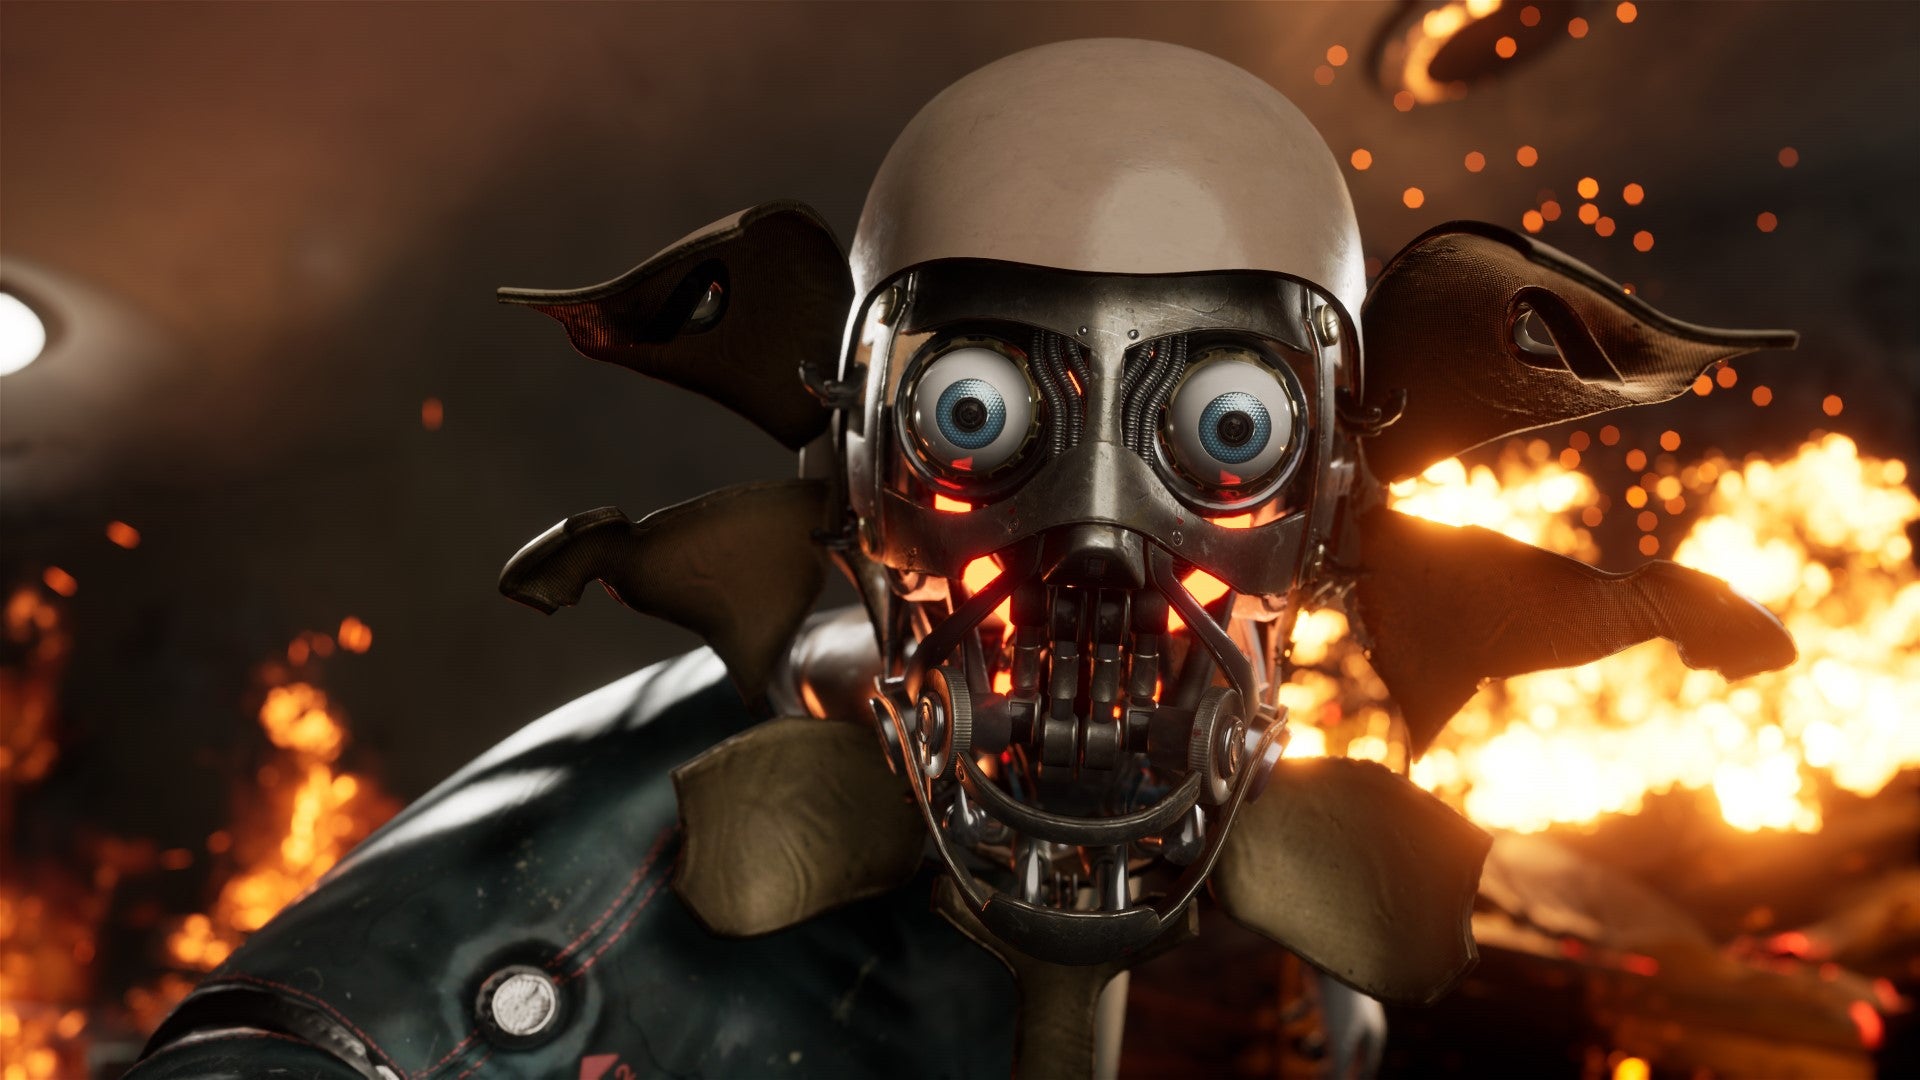 A screenshot from Atomic Heart which shows a close-up of an android's face that's peeled apart to reveal its horrible innards.